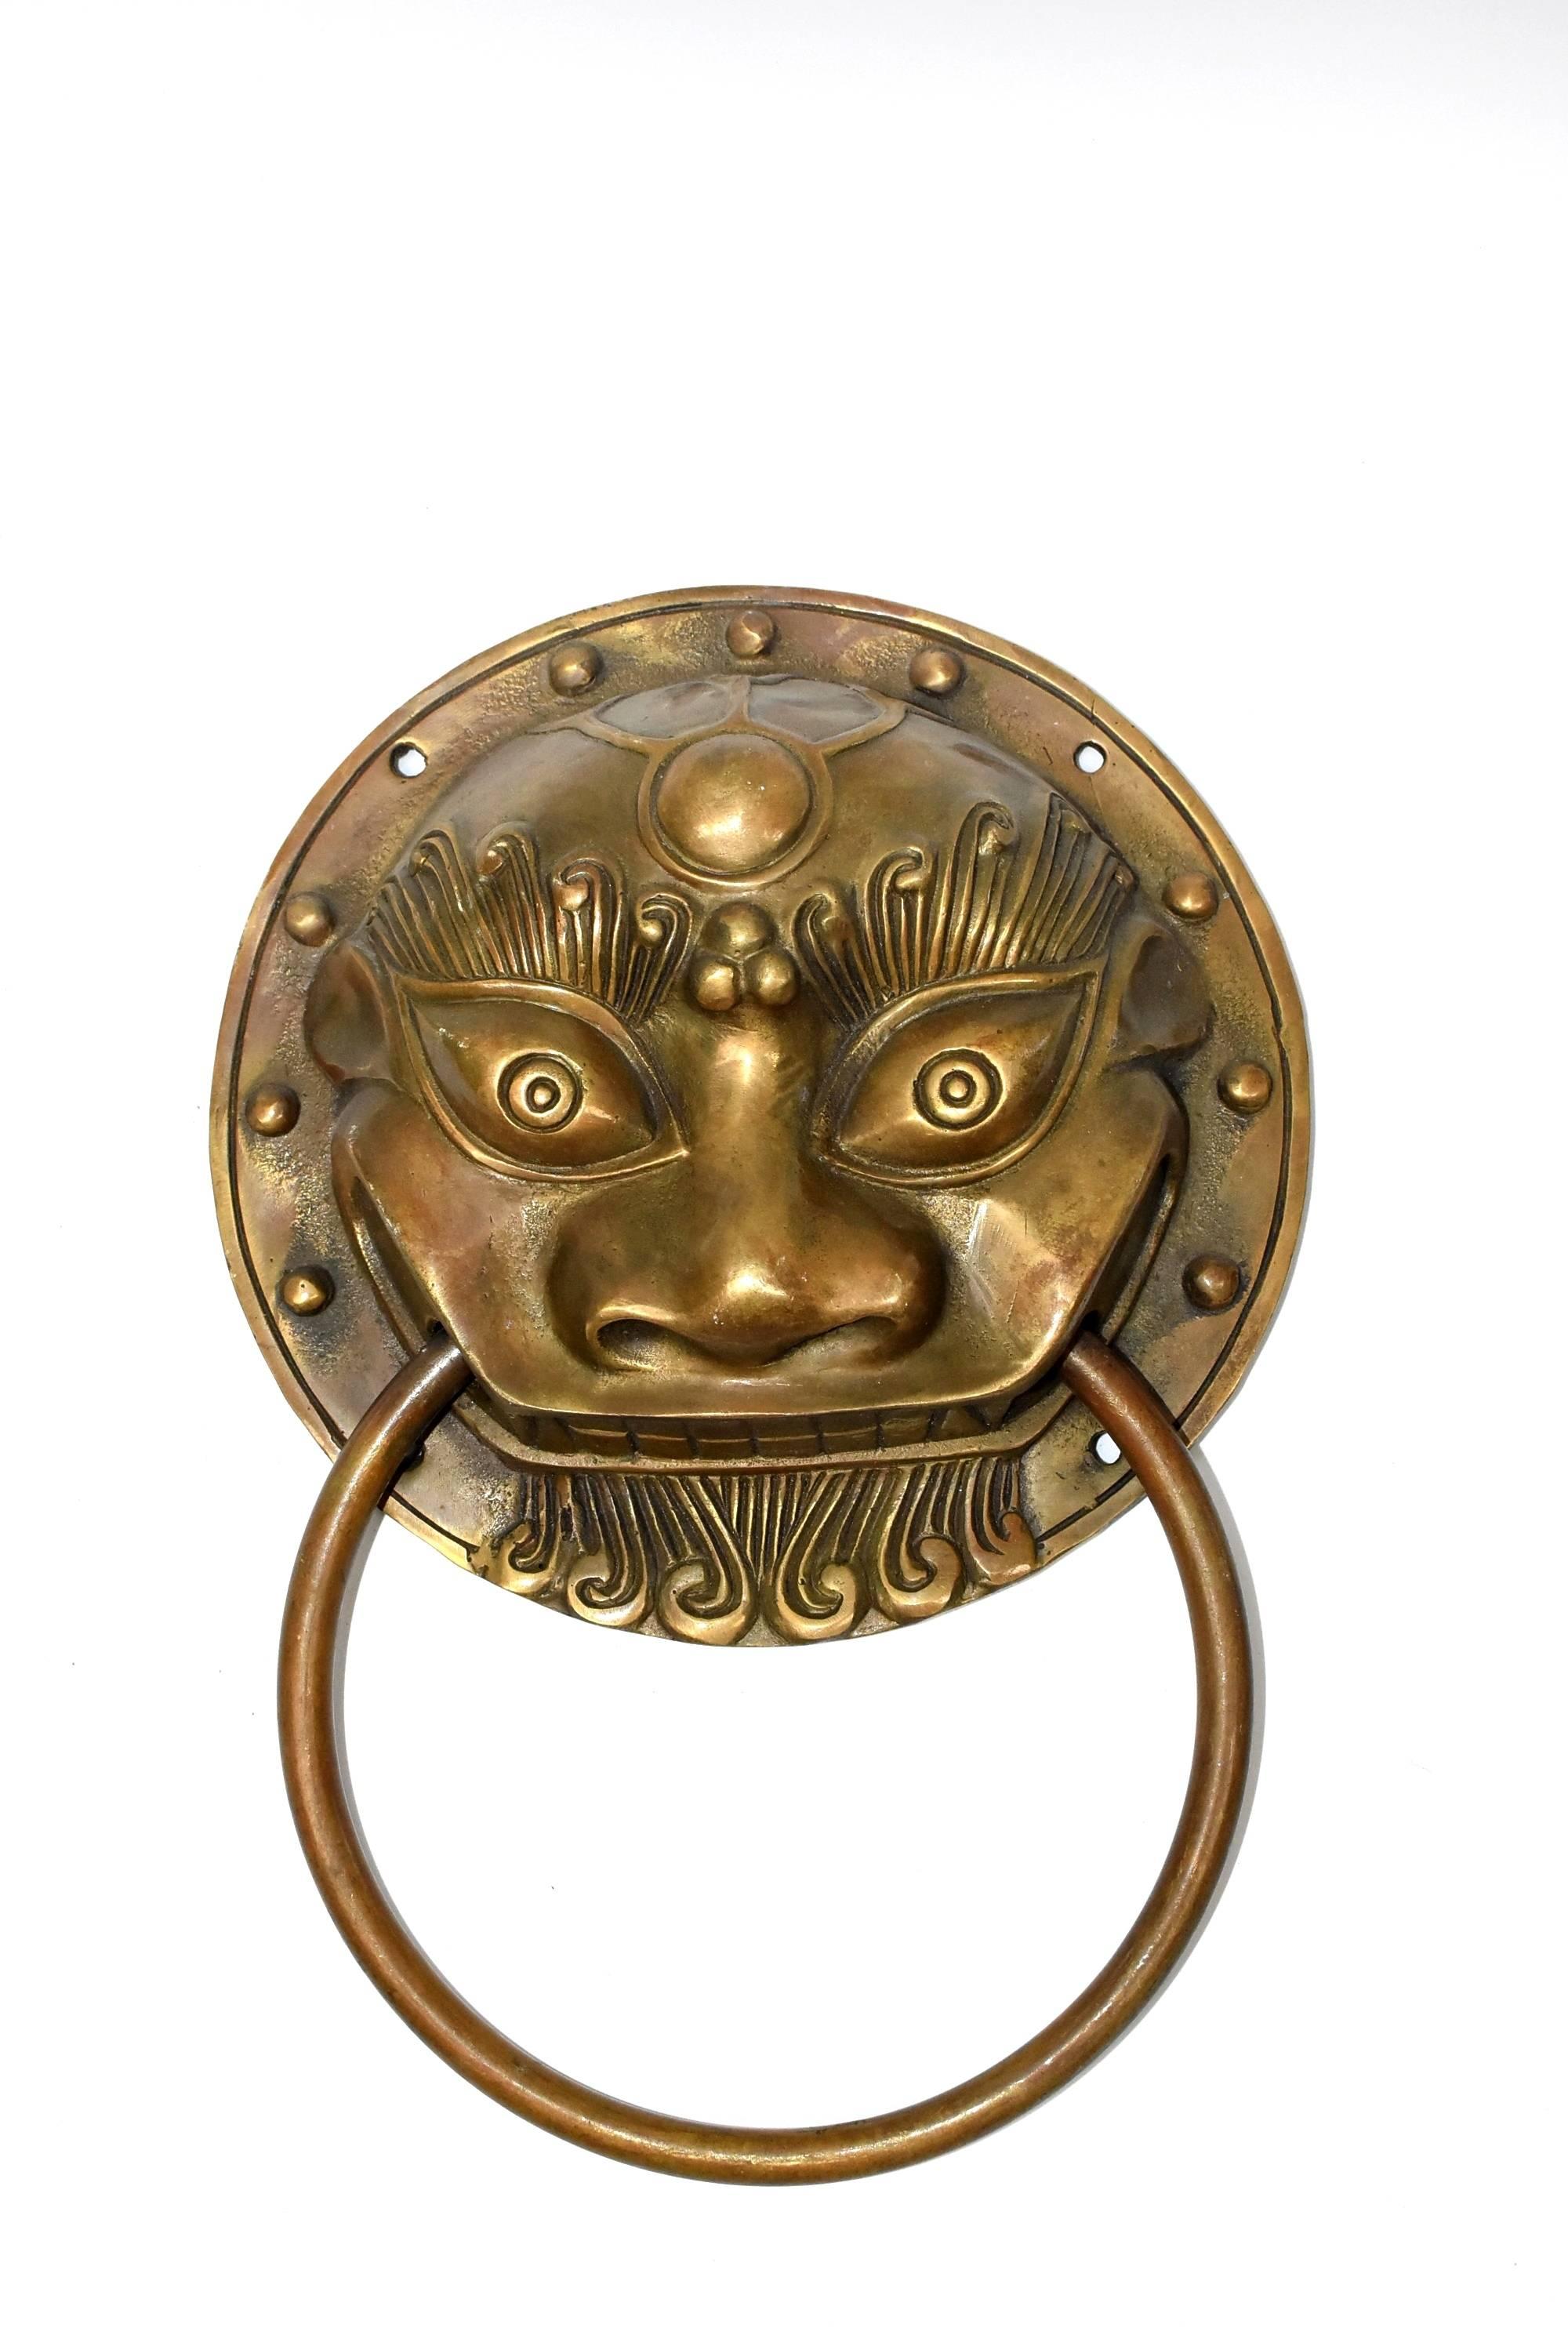 Our brass knockers can be used as door knockers or hand towel rings. Fine craftsmanship depicts the ancient mythical animals with a high level of artistic expression. The featured prehistoric beasts have strong jaws and huge eyes. They are believed